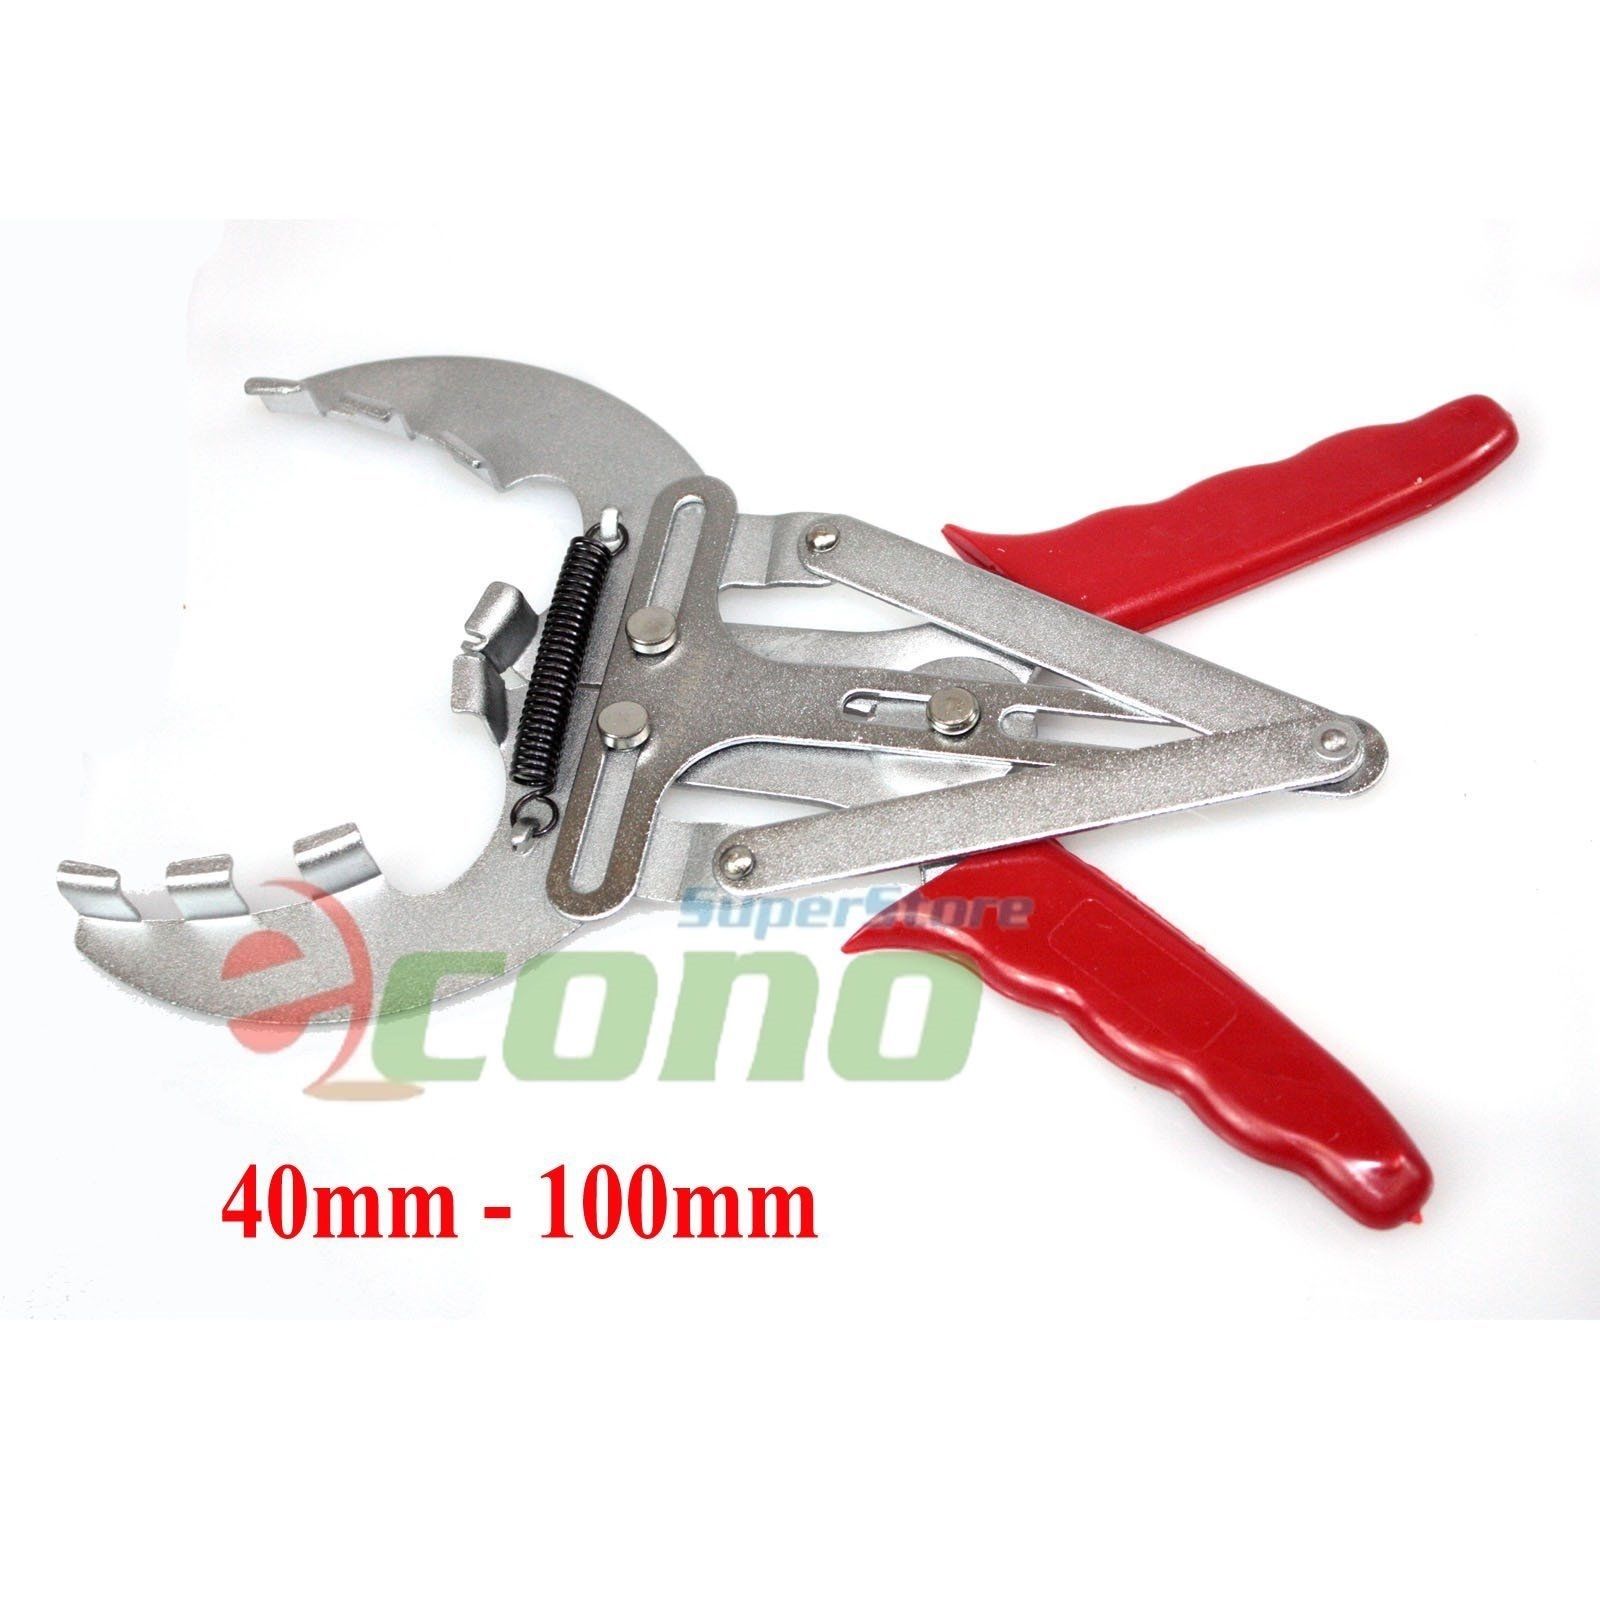 100mm Piston Ring Compressor Pliers Expander Removal Remover Grips 50mm 